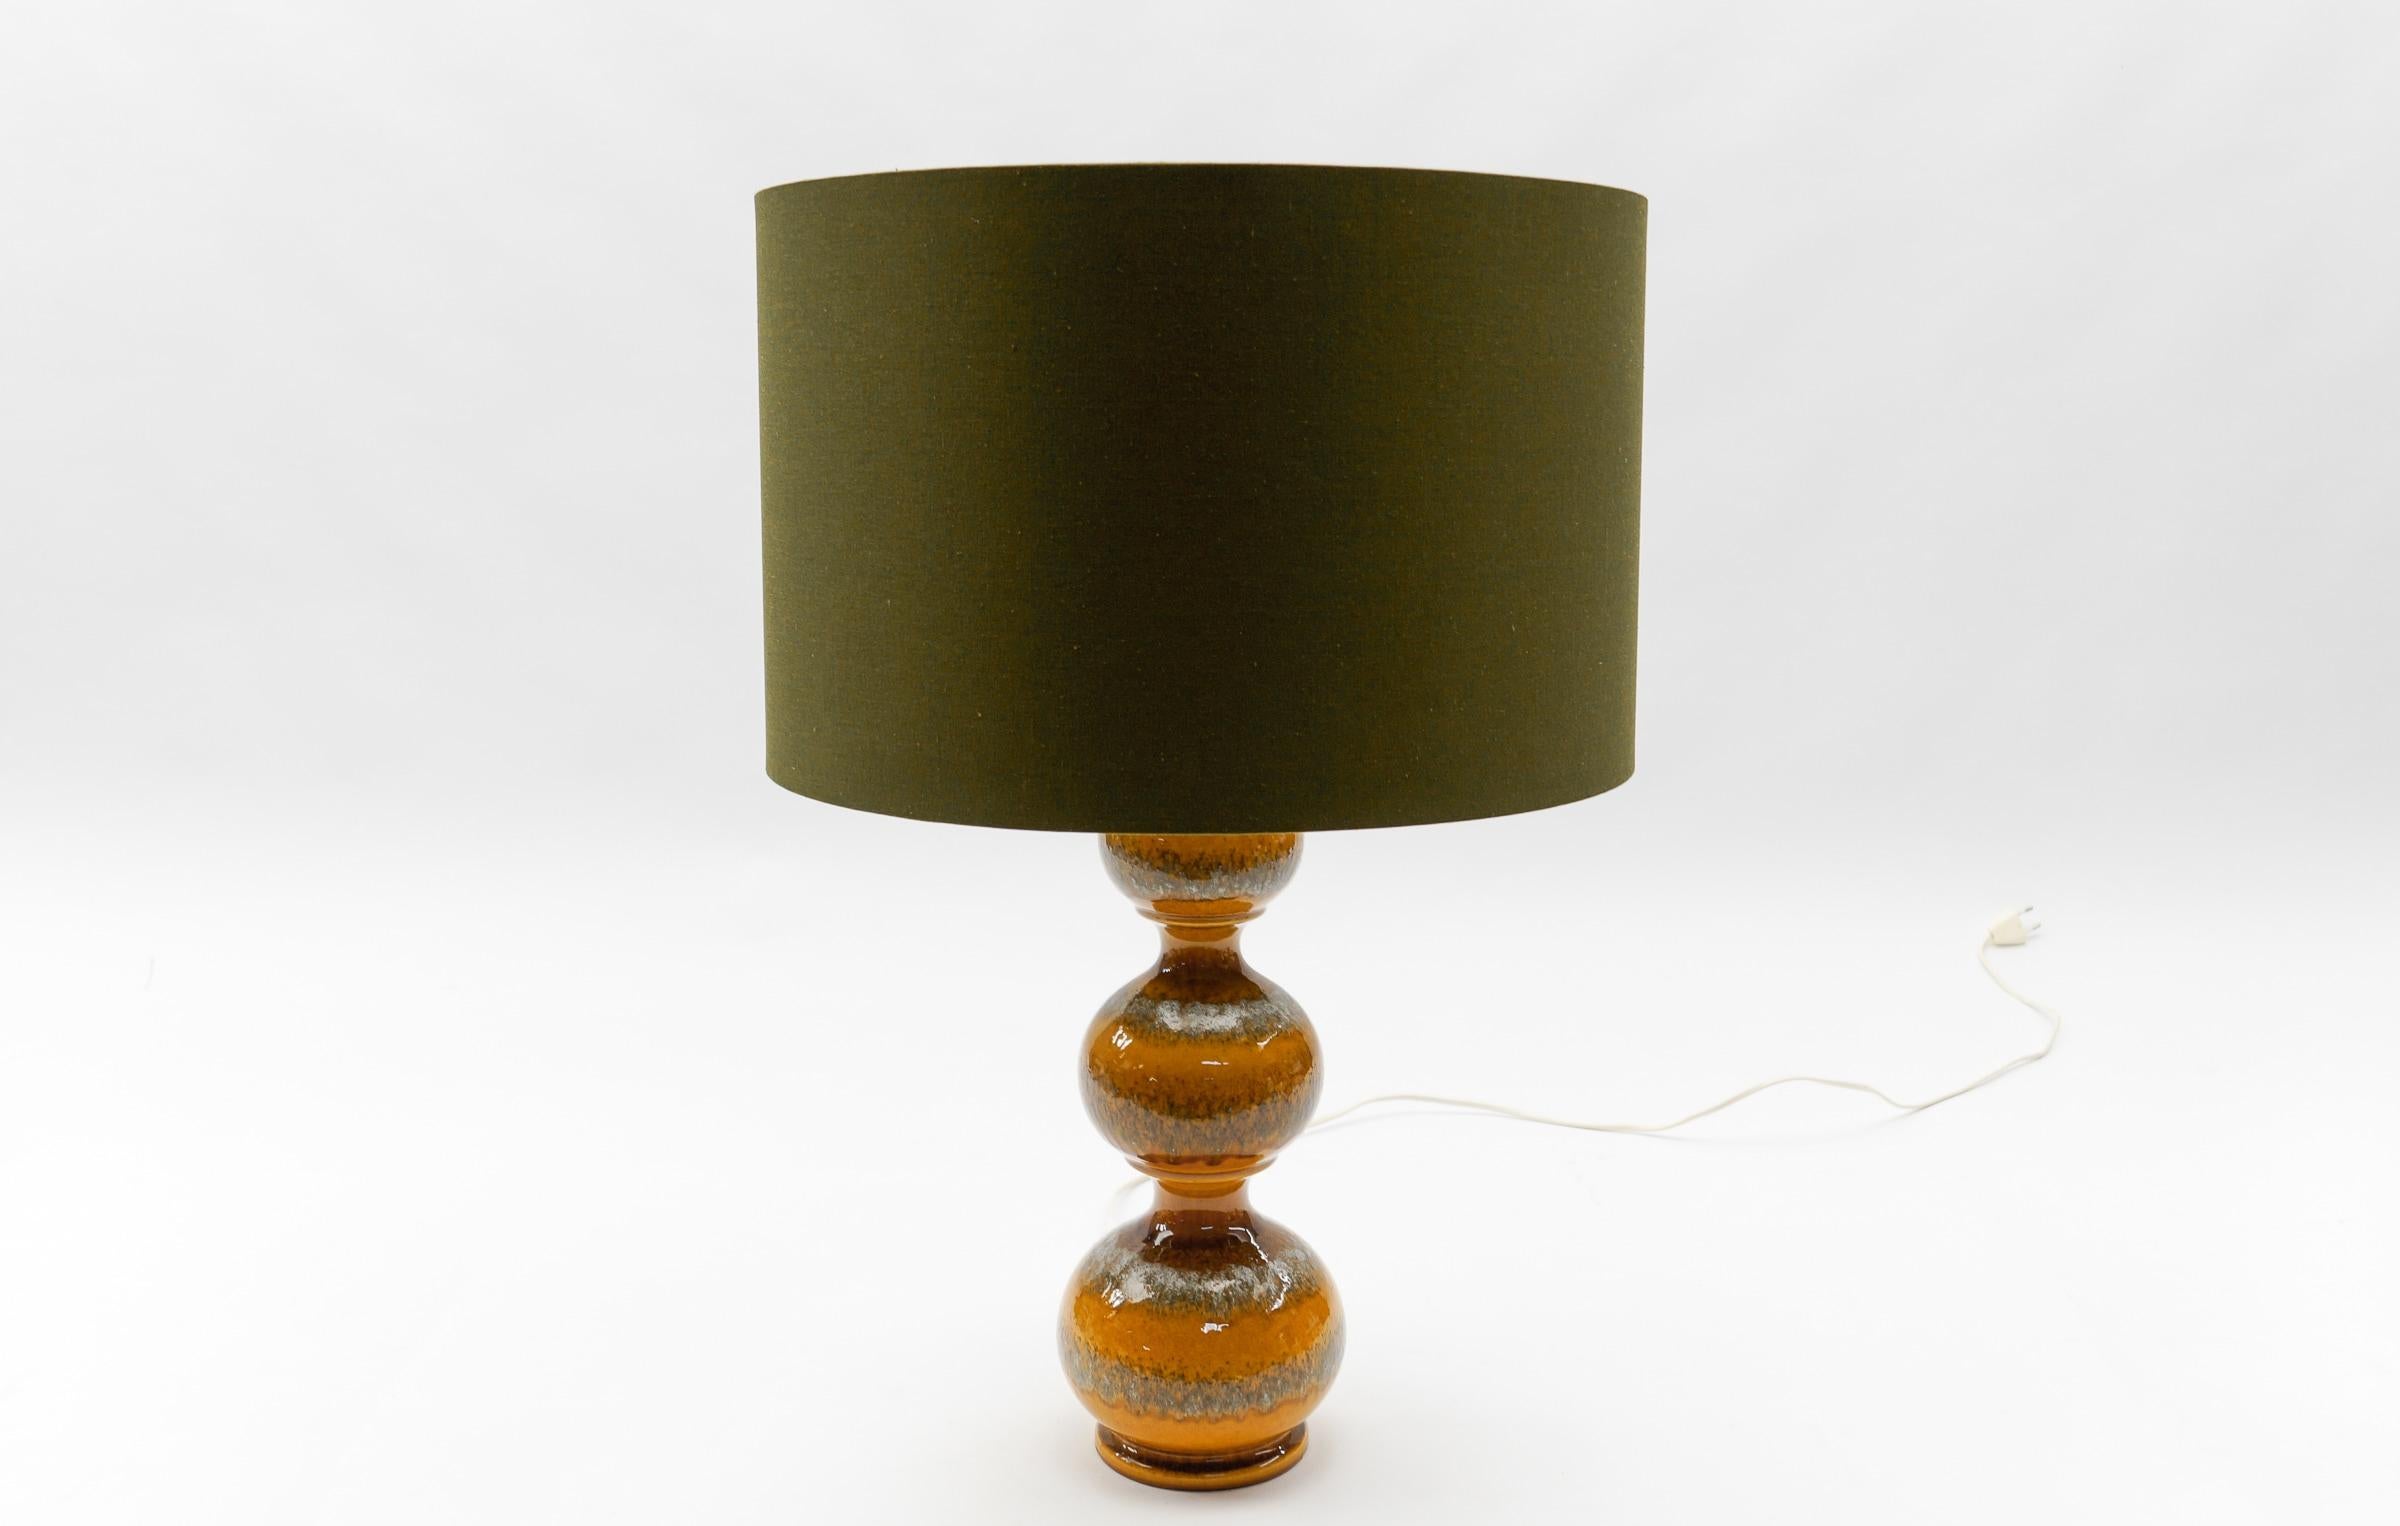 Space Age Very Rare Orange Ceramic Table Lamp Base from Kaiser Leuchten, Germany 1960s --- For Sale